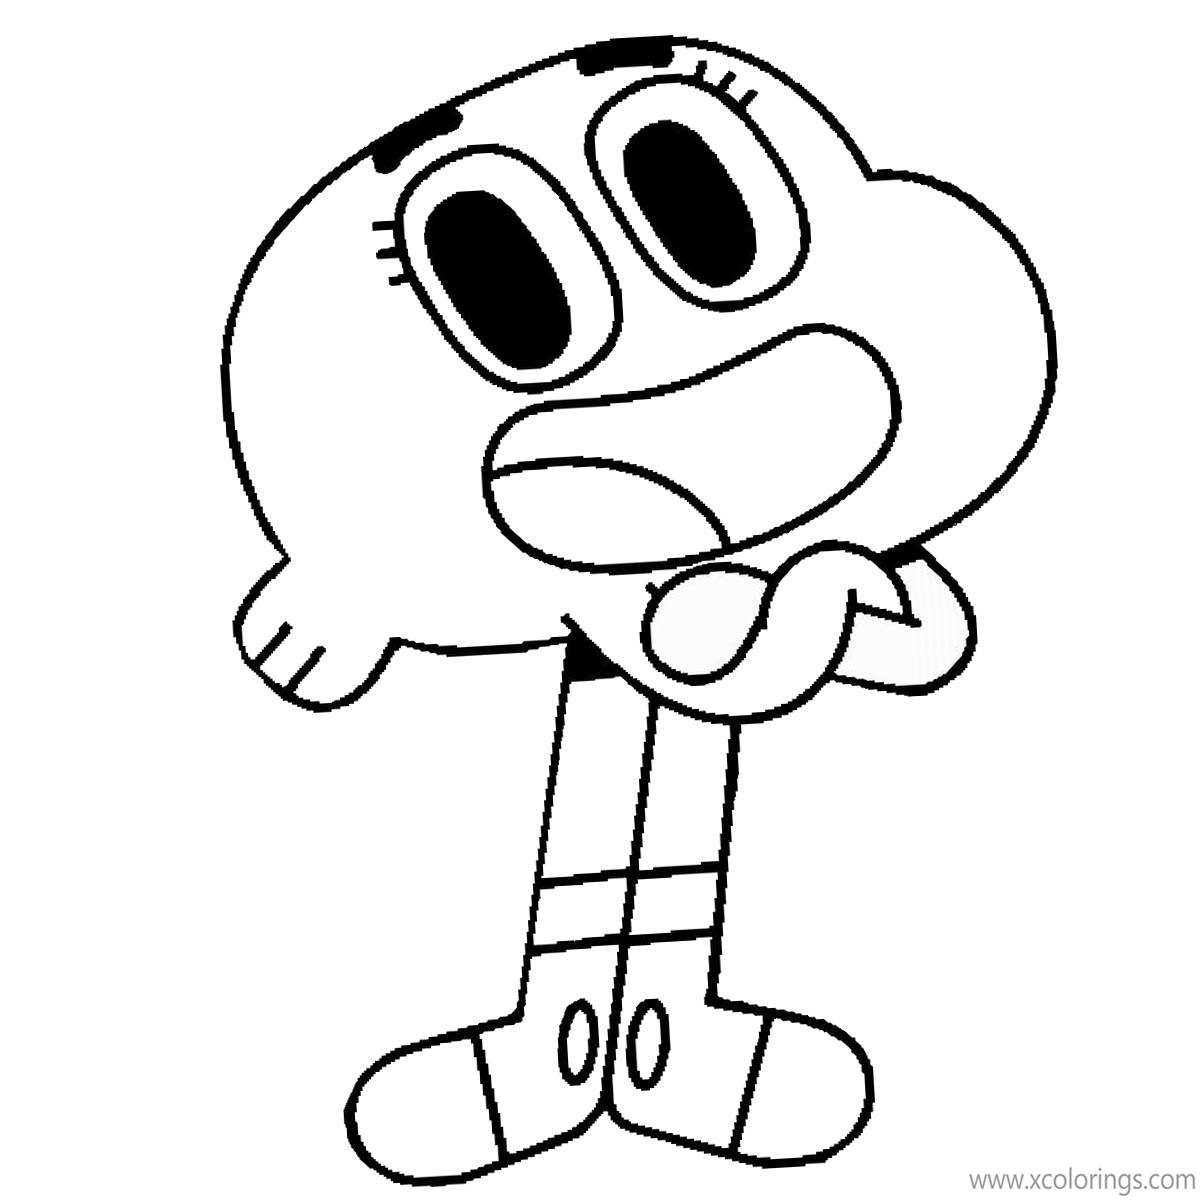 The Amazing World of Gumball Coloring Pages Darwin - XColorings.com